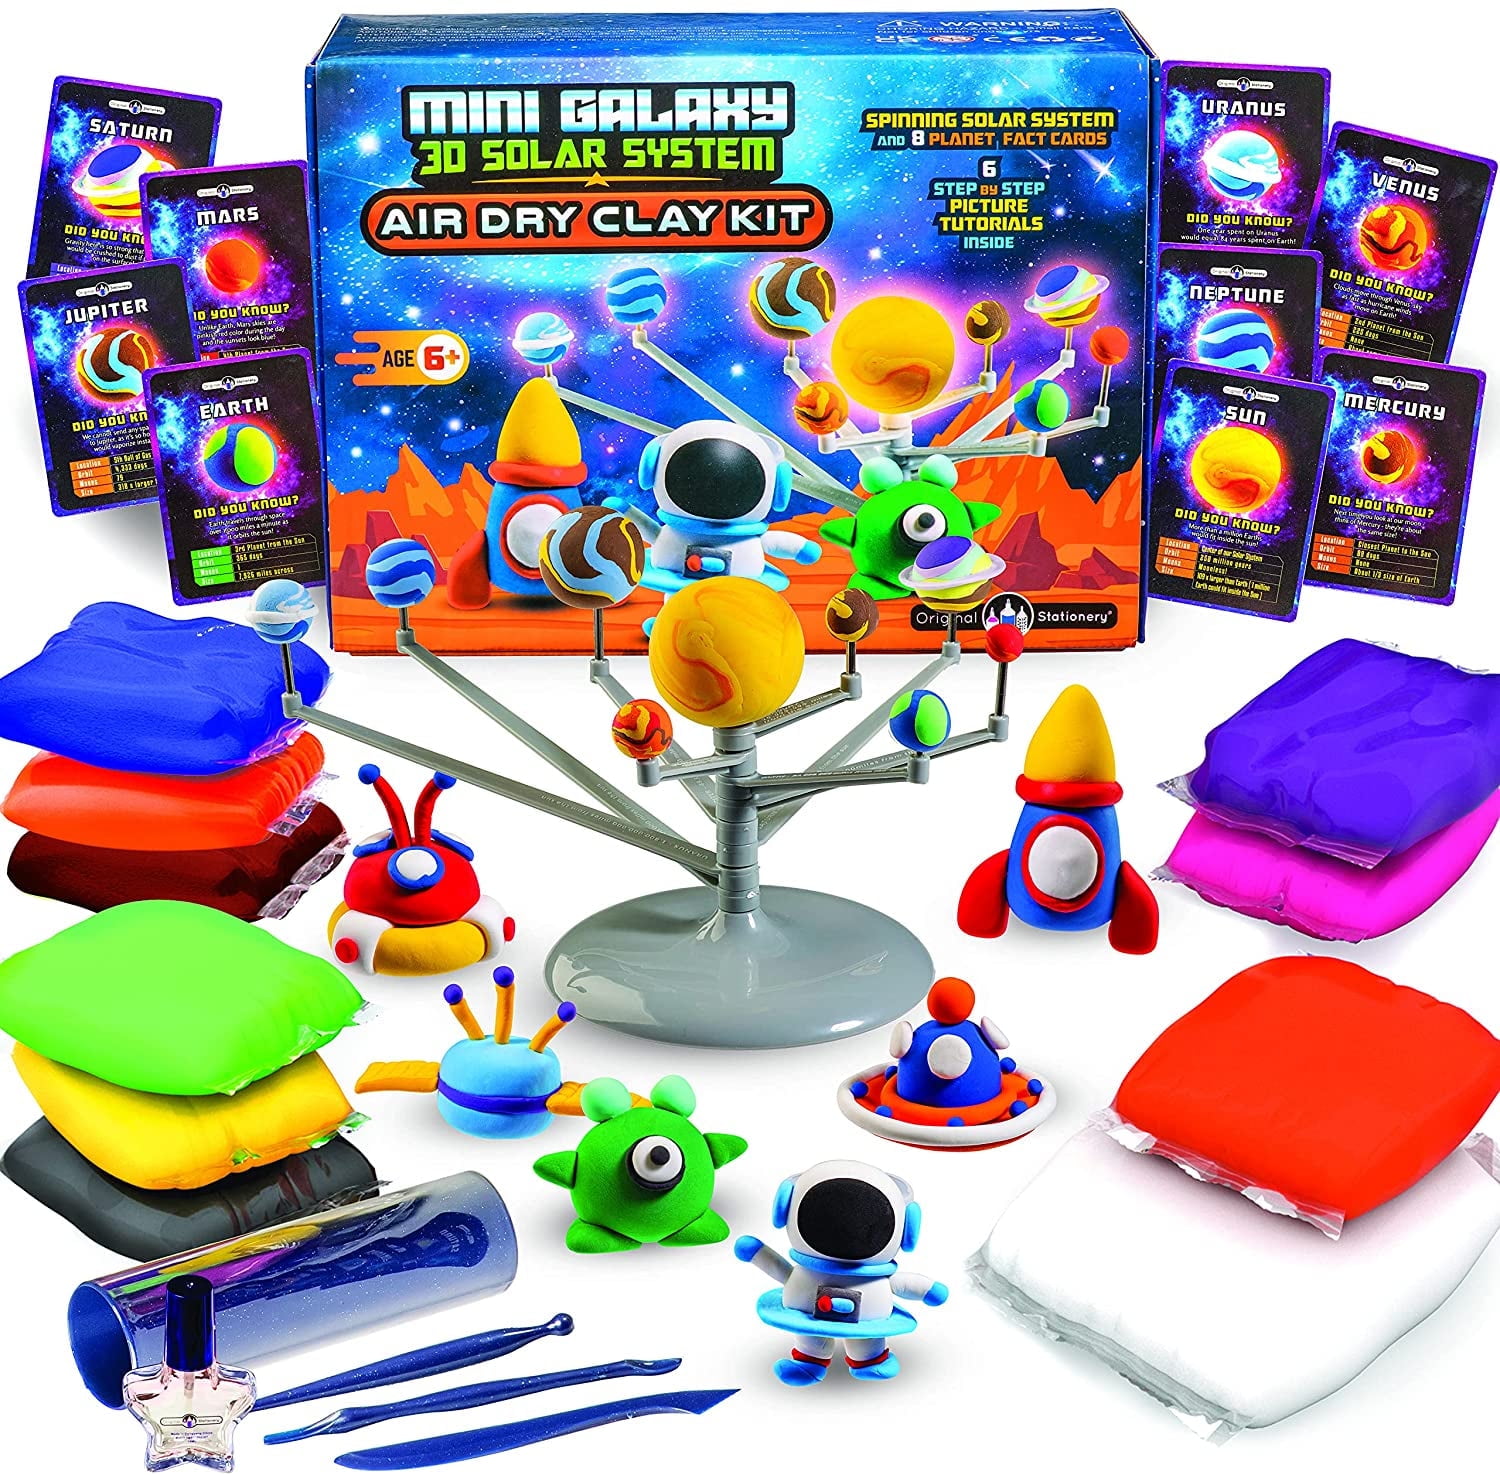 Original Stationery Mini Galaxy 3D Solar System Air Dry Clay Kit with All The Clay Colors You Need, 8 Fact Cards, Tools and More in This Kit to Make